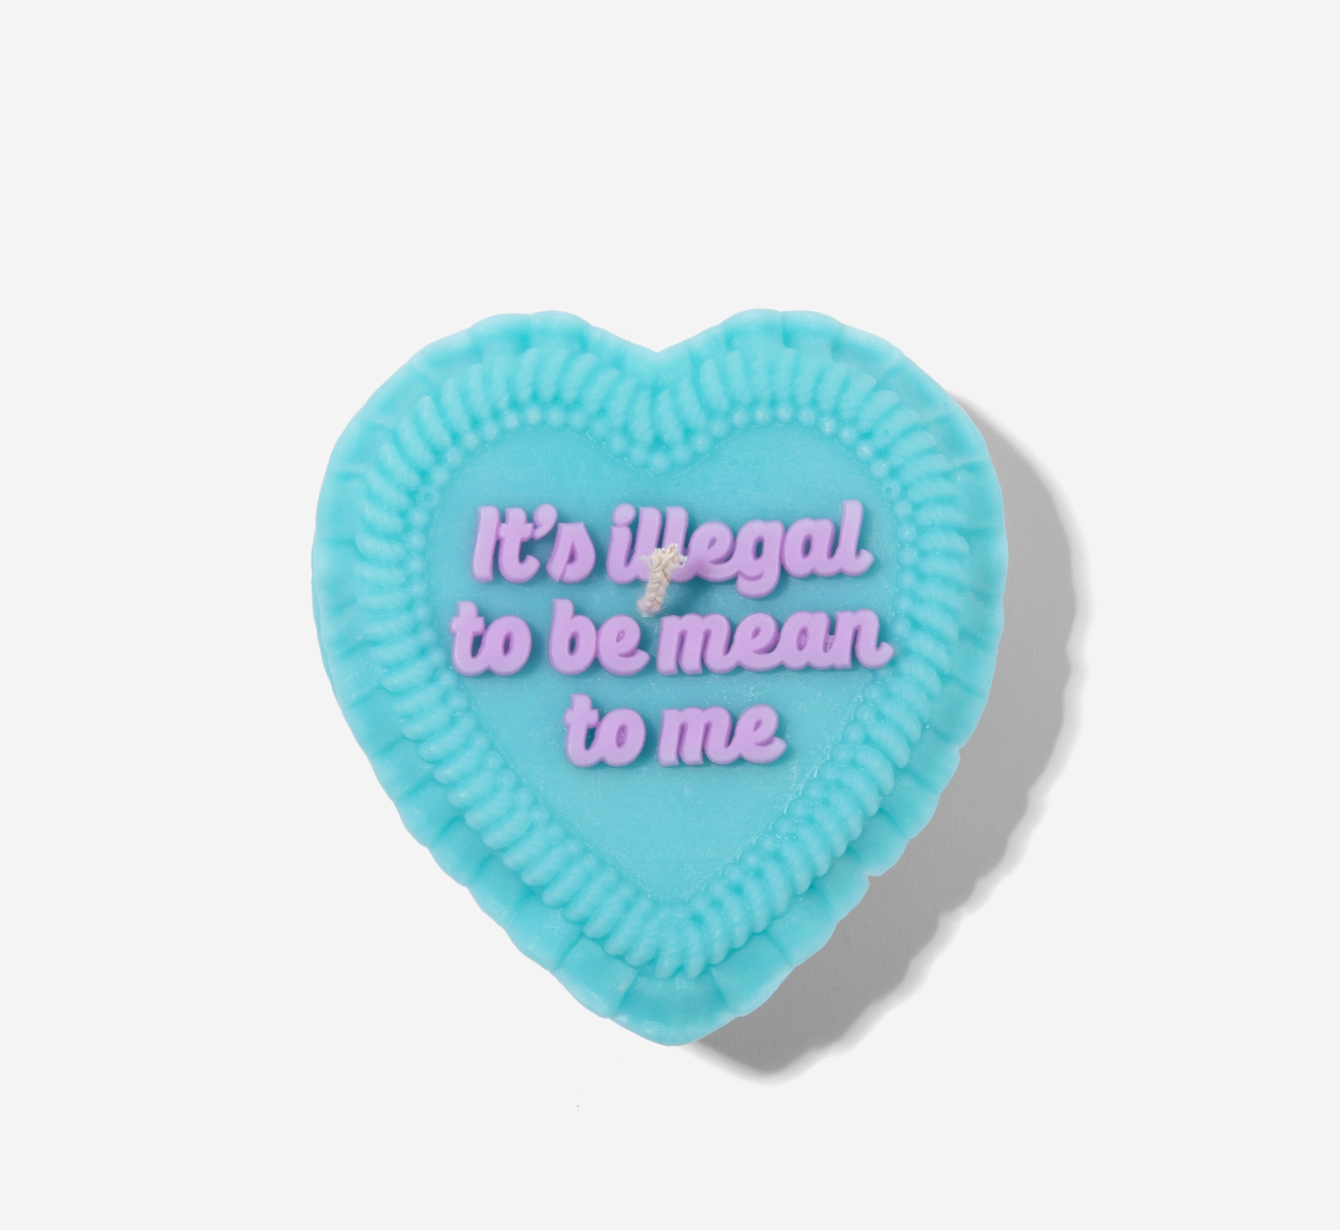 It's Illegal To Be Mean To Me Vintage Heart-Shaped Cake Soy Candle - 13.5 Ounces